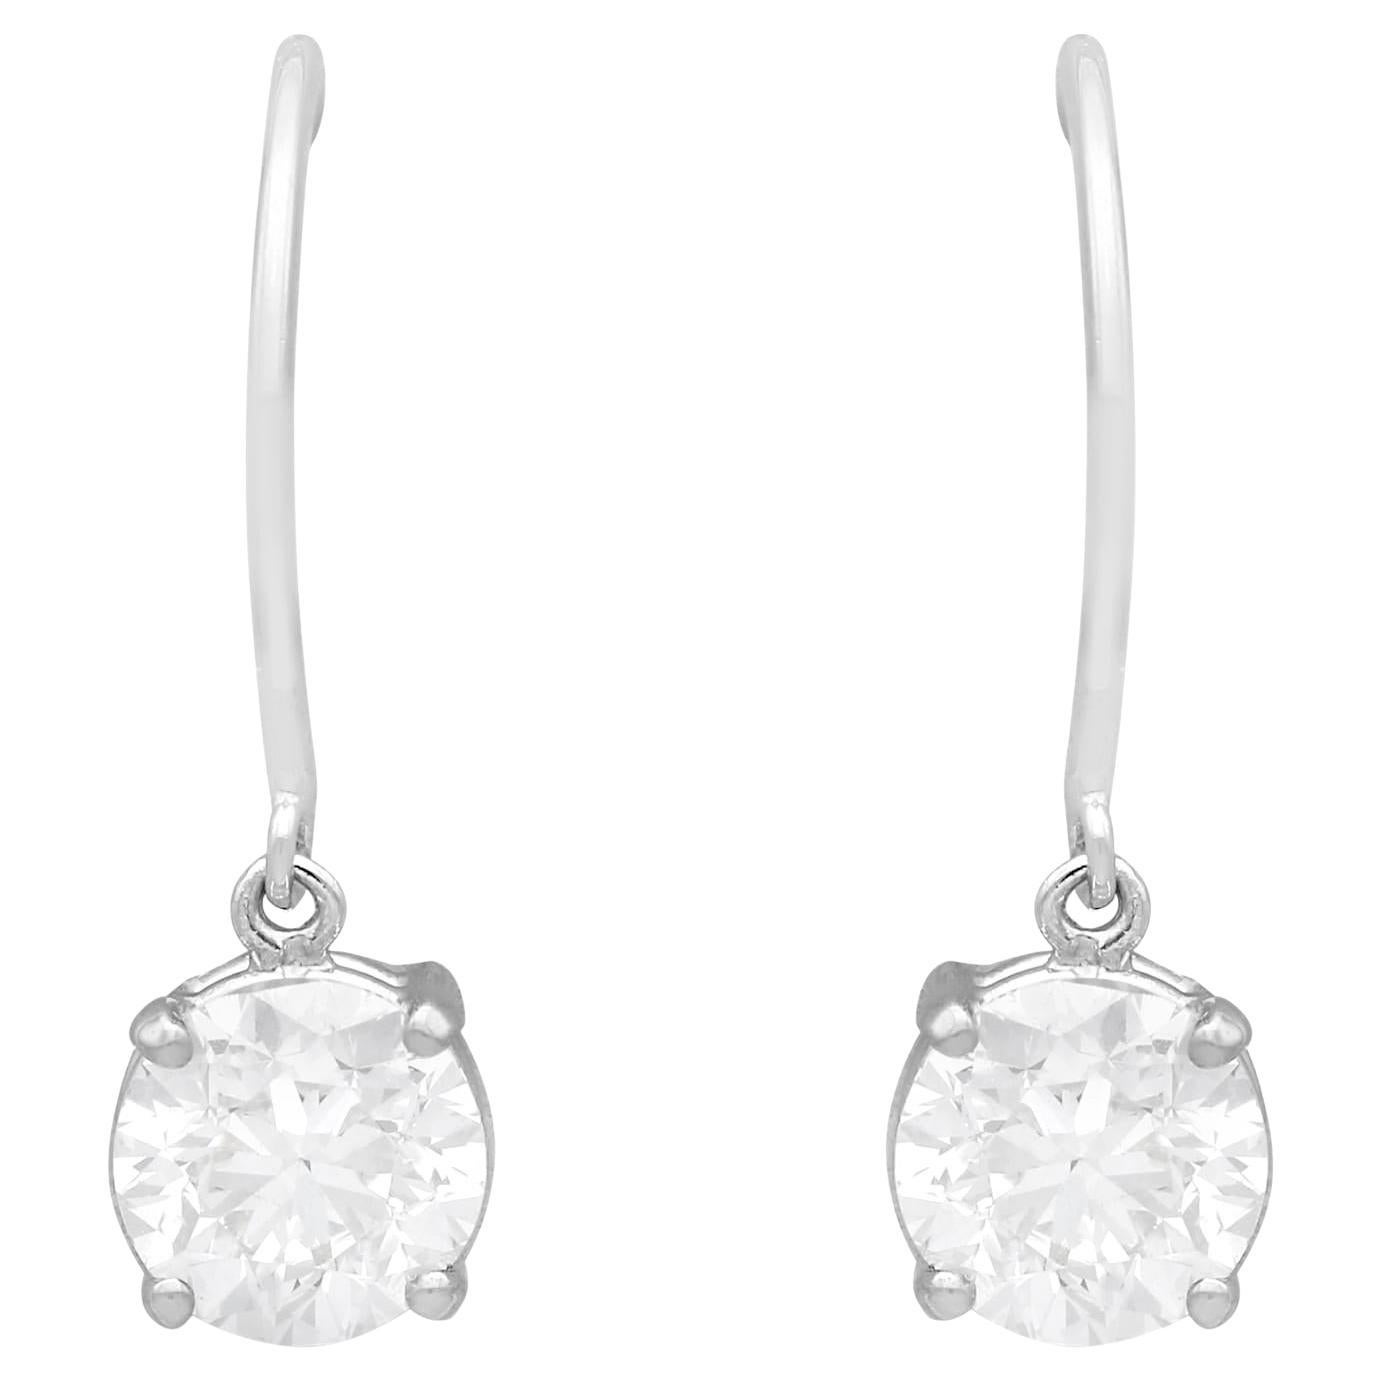 Vintage 2.03 Carat Diamond and 18k White Gold Solitaire Drop Earrings